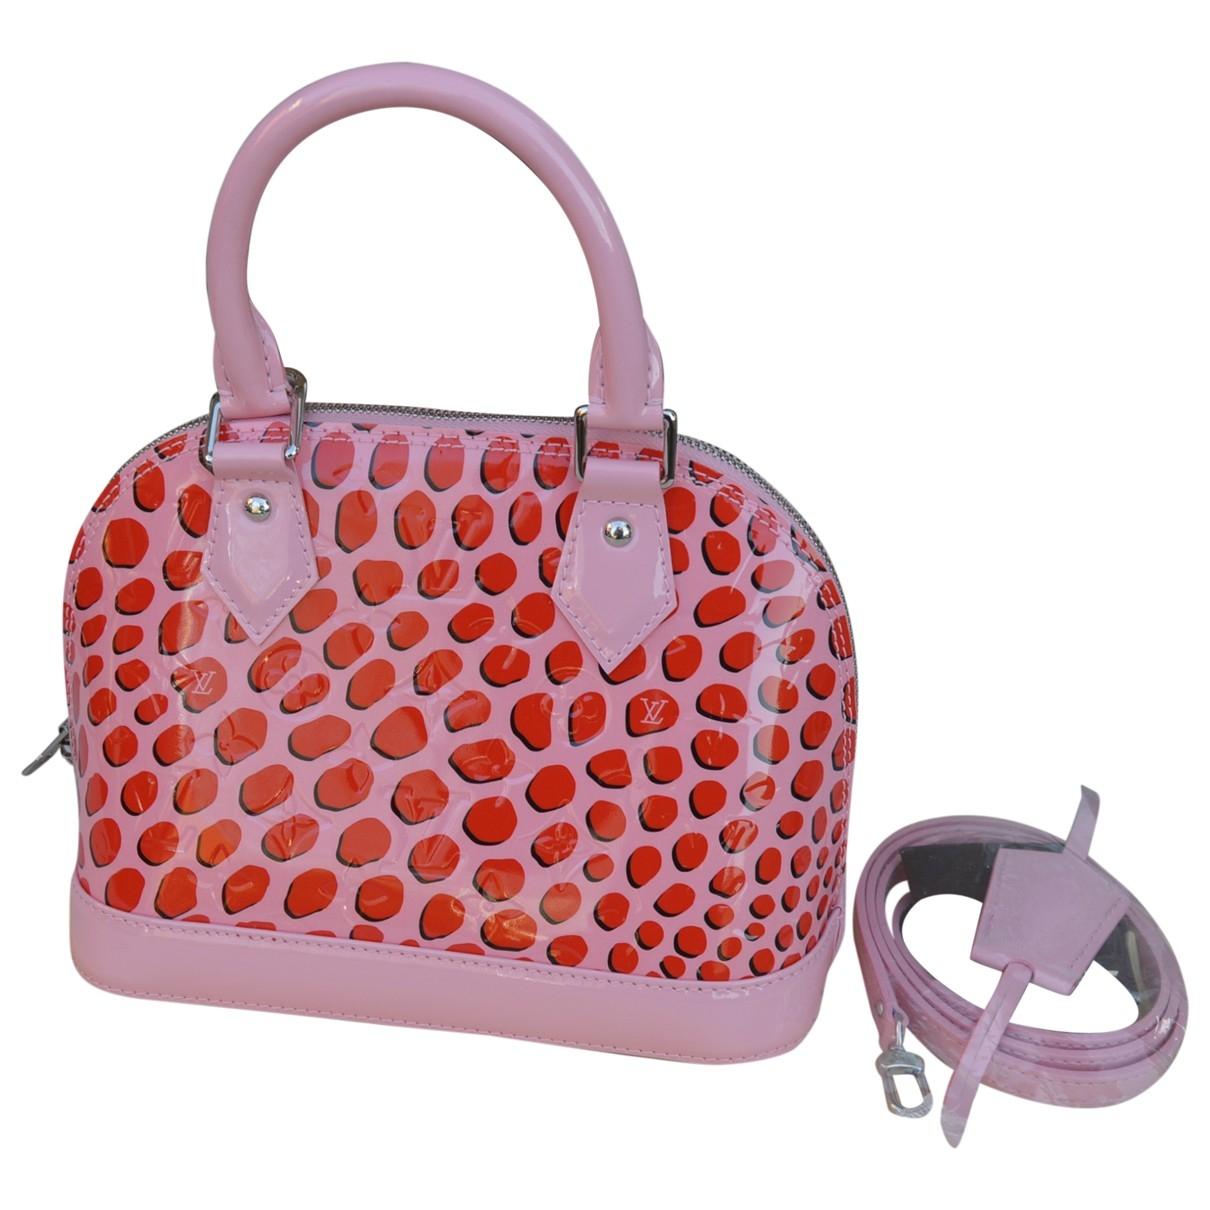 Lyst - Louis Vuitton Alma Pink Patent Leather Handbag in Pink